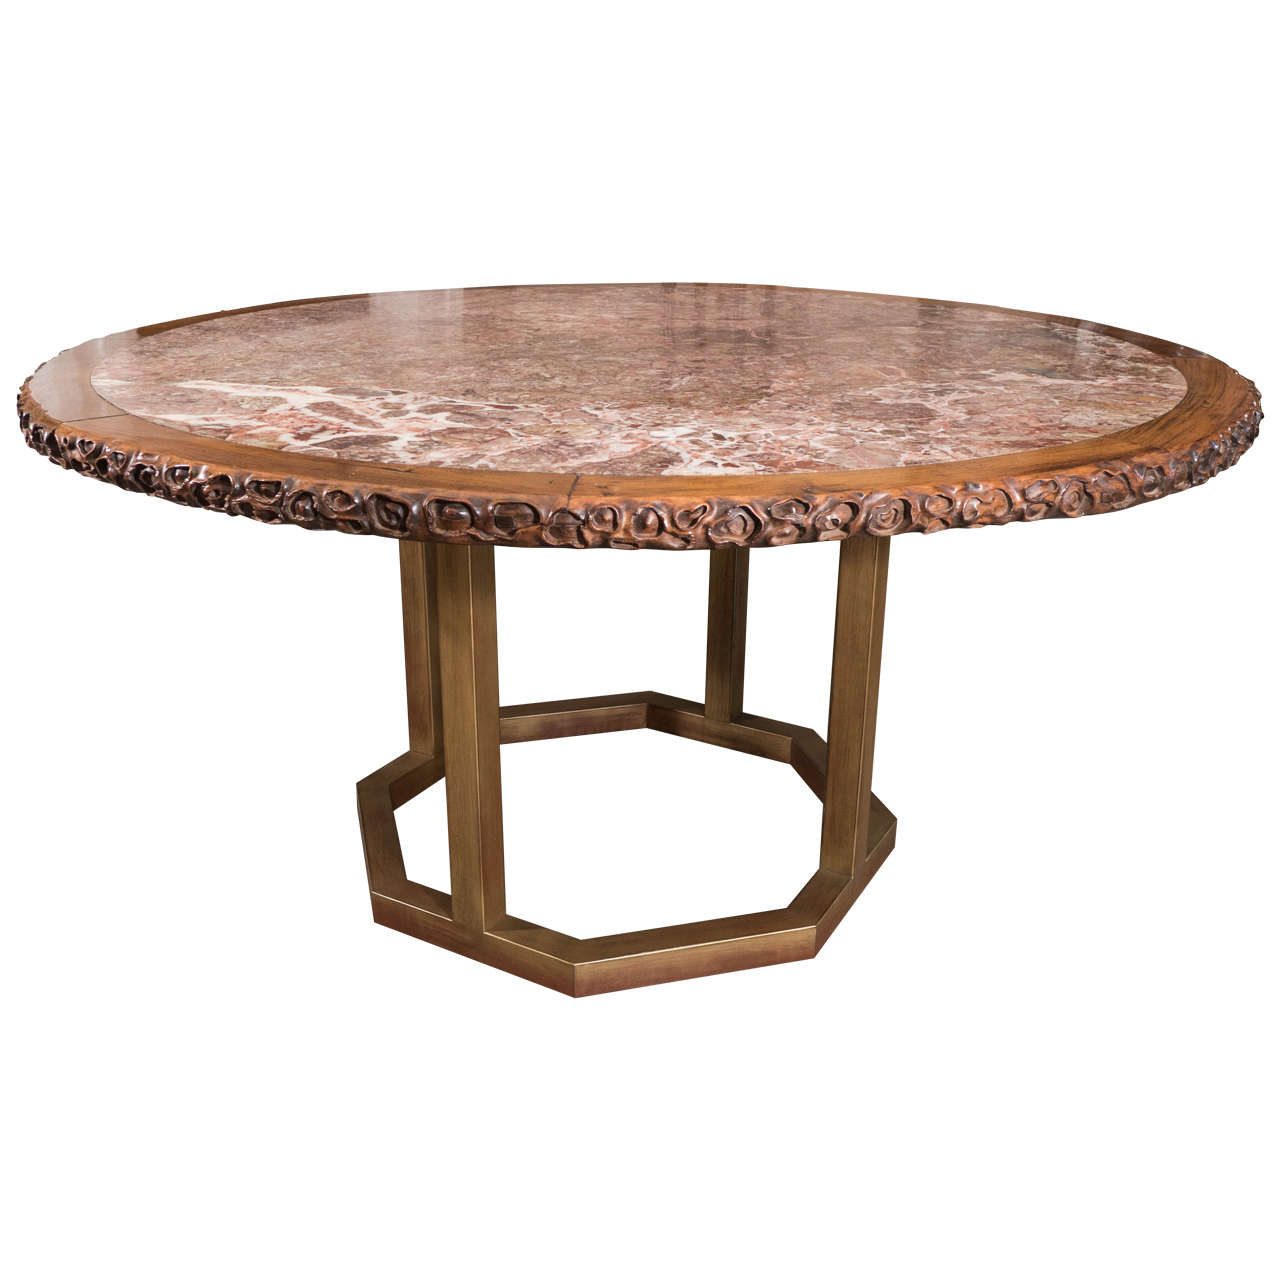 19th Century Chinese Hongmu Round Table with Inset Marble Top For Sale